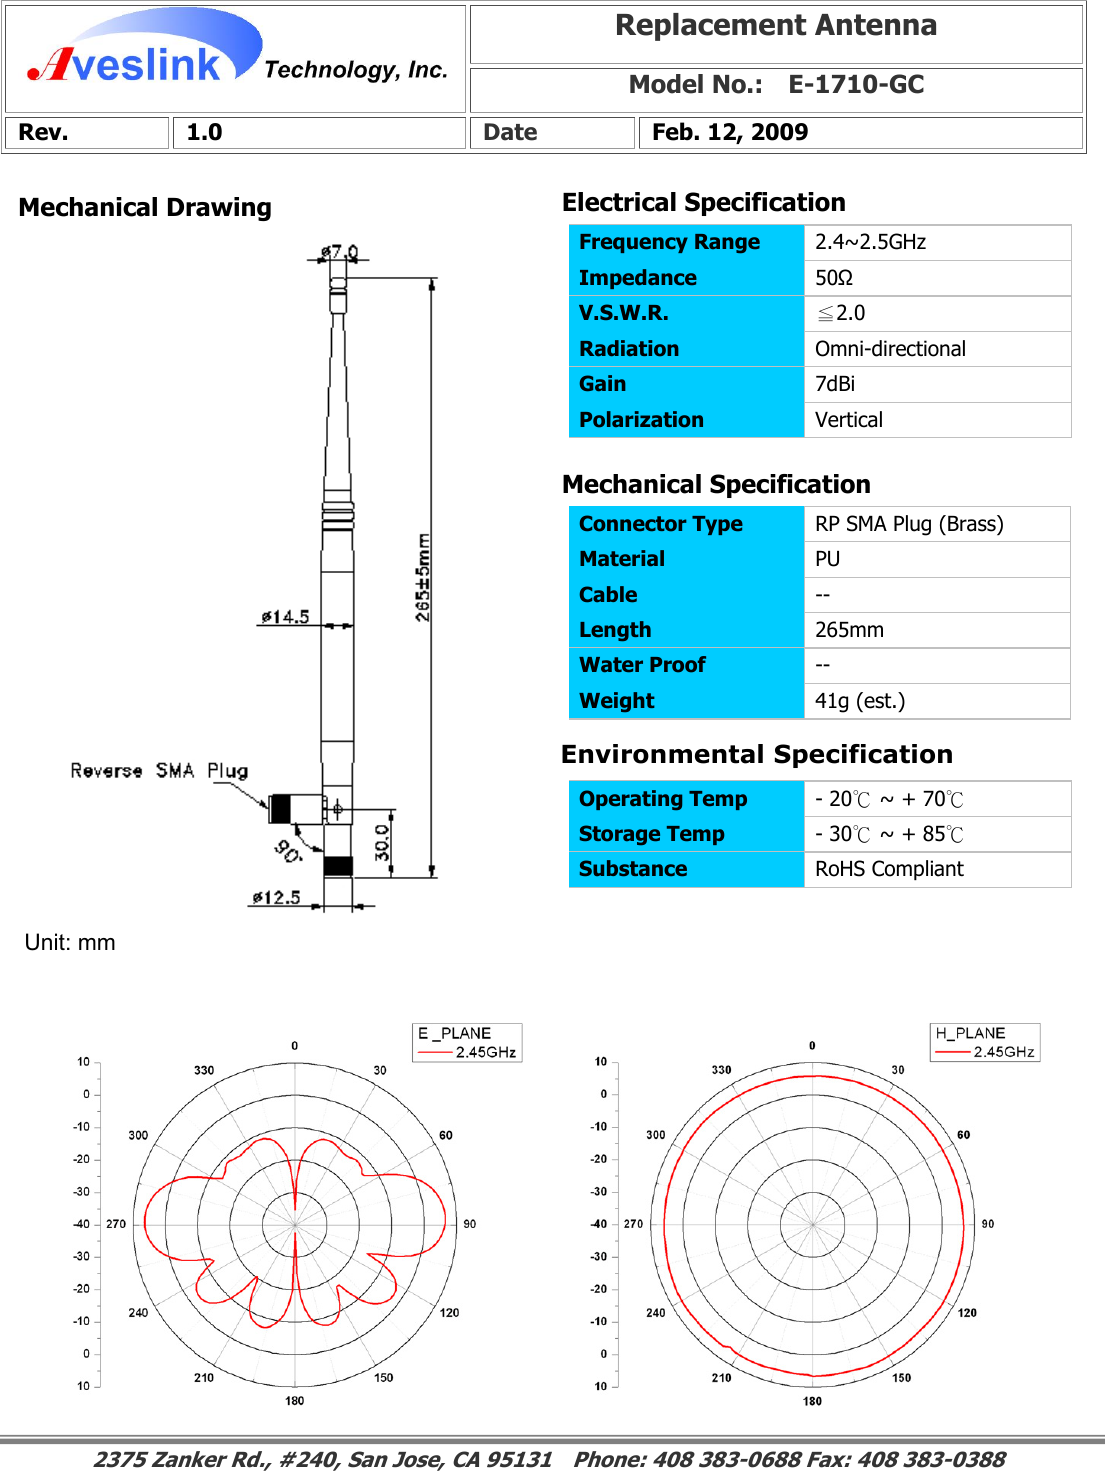 Mechanical Drawing Mechanical Specification Replacement Antenna Model No.:    E-1710-GCRev. 1.0  Date  Feb. 12, 2009 Connector Type    RP SMA Plug (Brass) Material  PU Cable  -- Length  265mm Water Proof  -- Weight  41g (est.)                                                                                                                                                                                                                     2375 Zanker Rd., #240, San Jose, CA 95131    Phone: 408 383-0688 Fax: 408 383-0388 Operating Temp  - 20℃ ~ + 70  ℃ Storage Temp  - 30℃ ~ + 85  ℃ Substance  RoHS Compliant Electrical Specification Frequency Range    2.4~2.5GHz Impedance  50Ω V.S.W.R.  2.0≦ Radiation  Omni-directional Gain  7dBi Polarization  Vertical Unit: mm Environmental Specification 